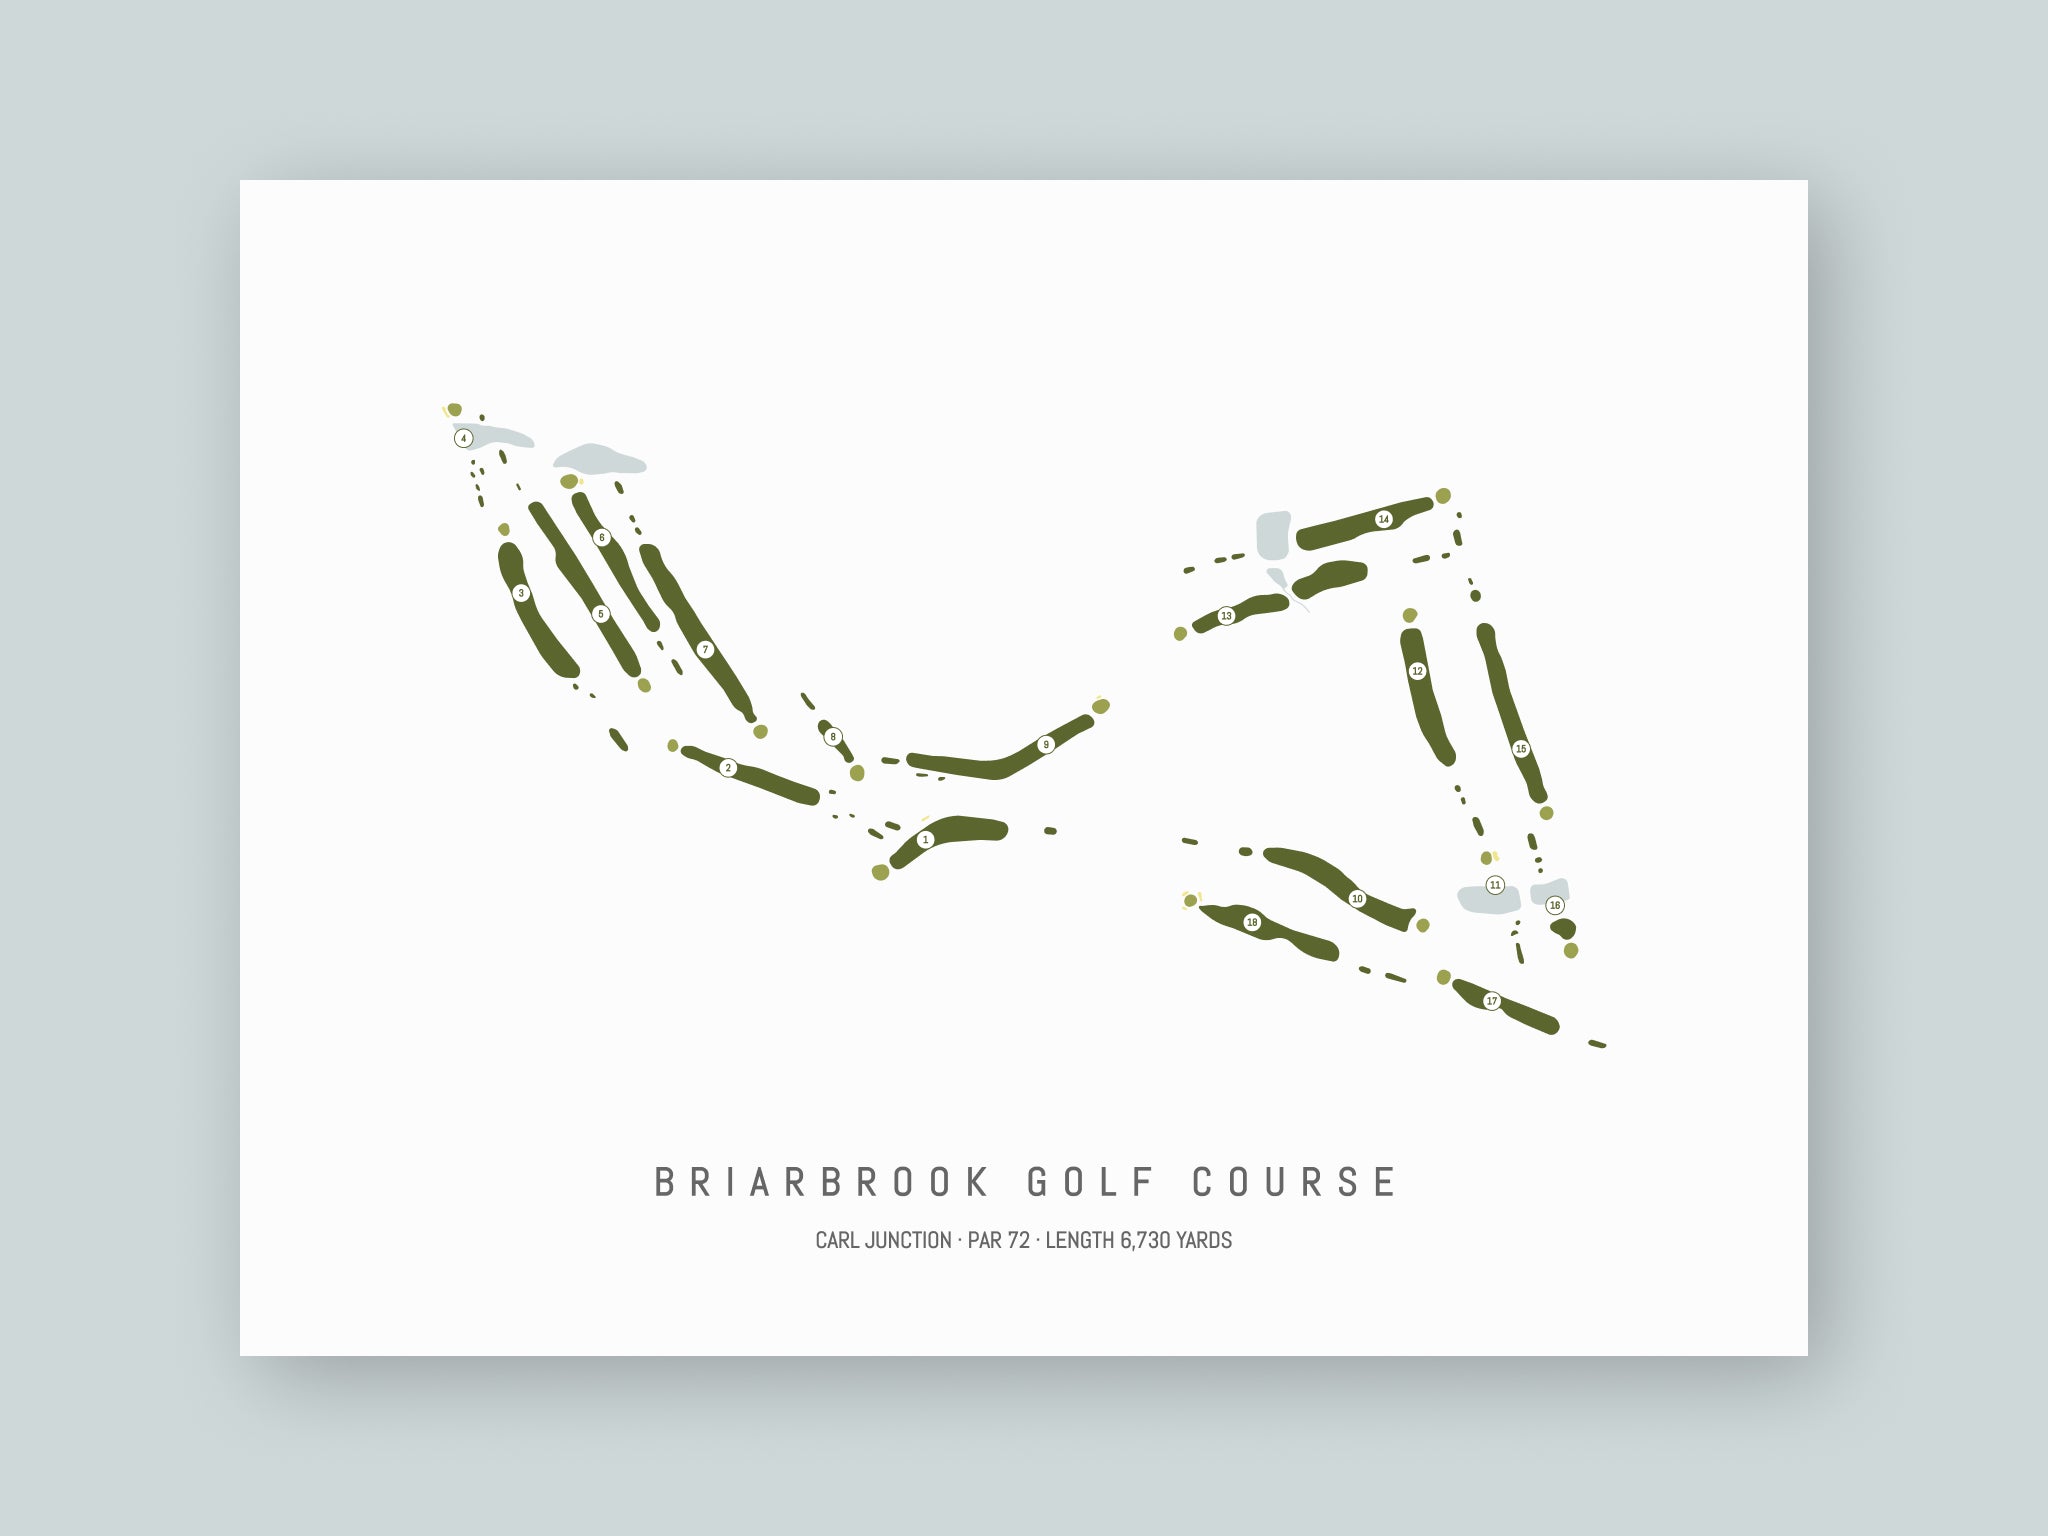 Briarbrook-Golf-Course-MO--Unframed-24x18-With-Hole-Numbers